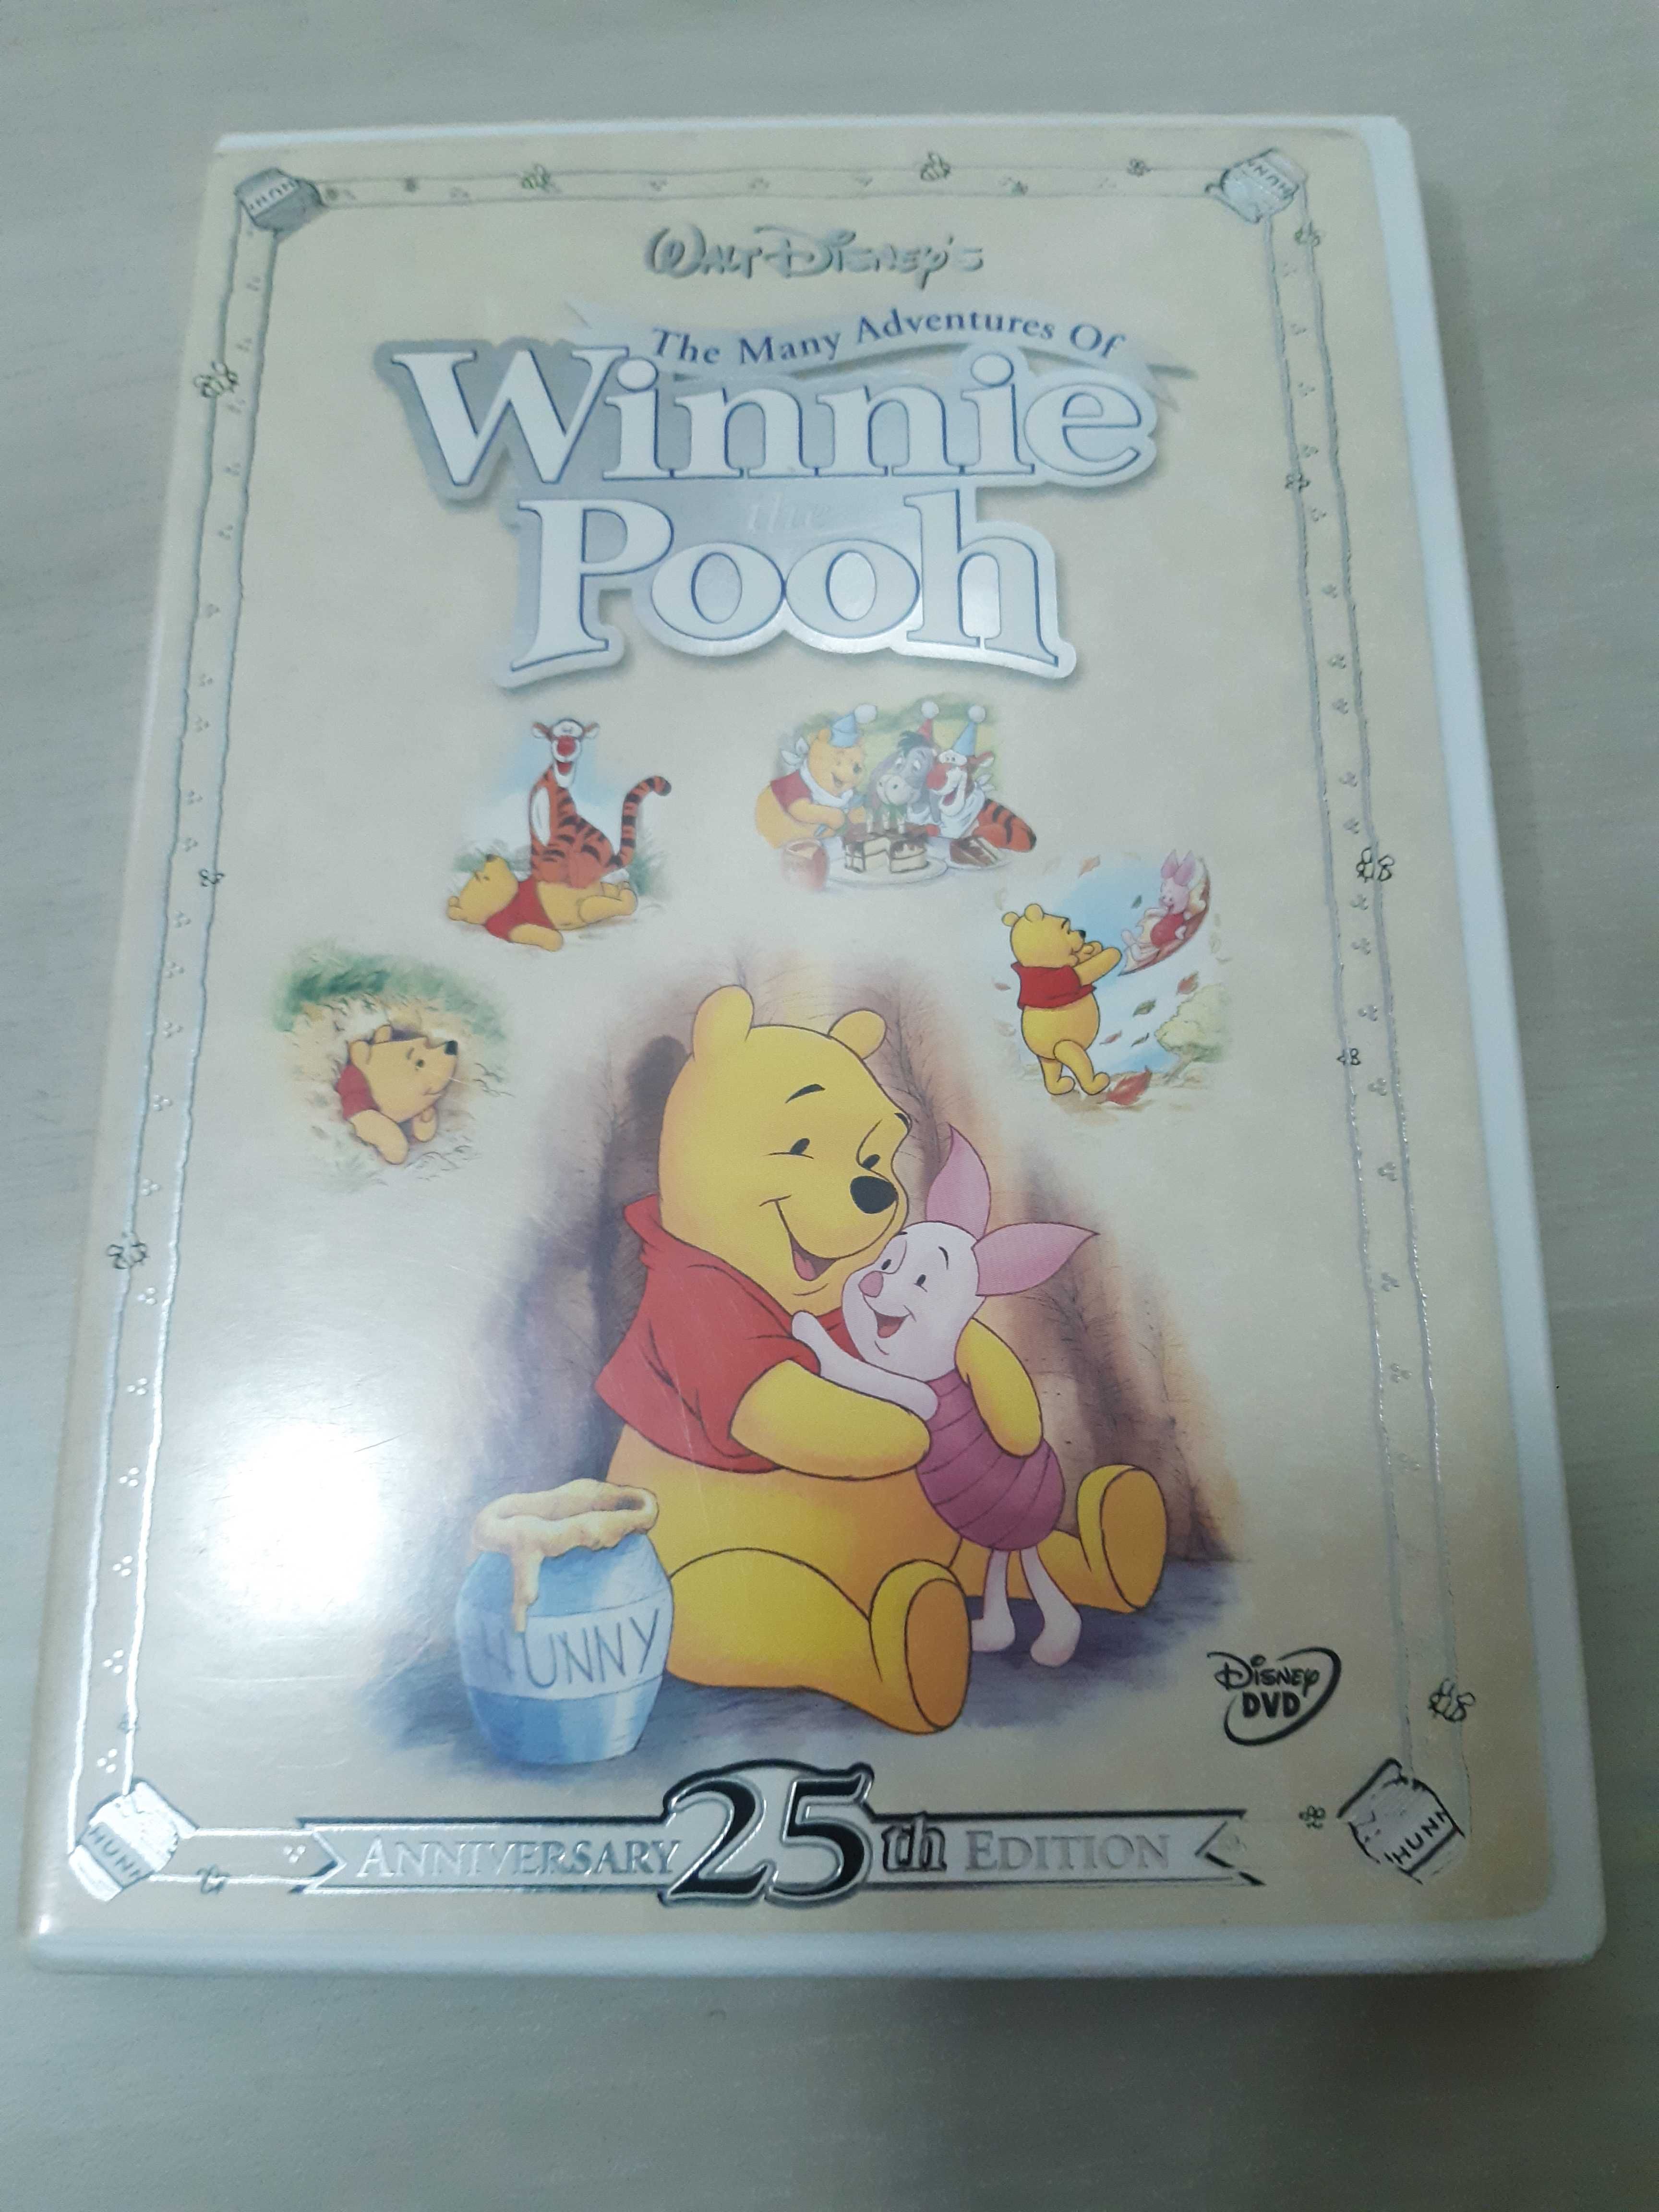 The many adventures of Winnie the pooh DVD